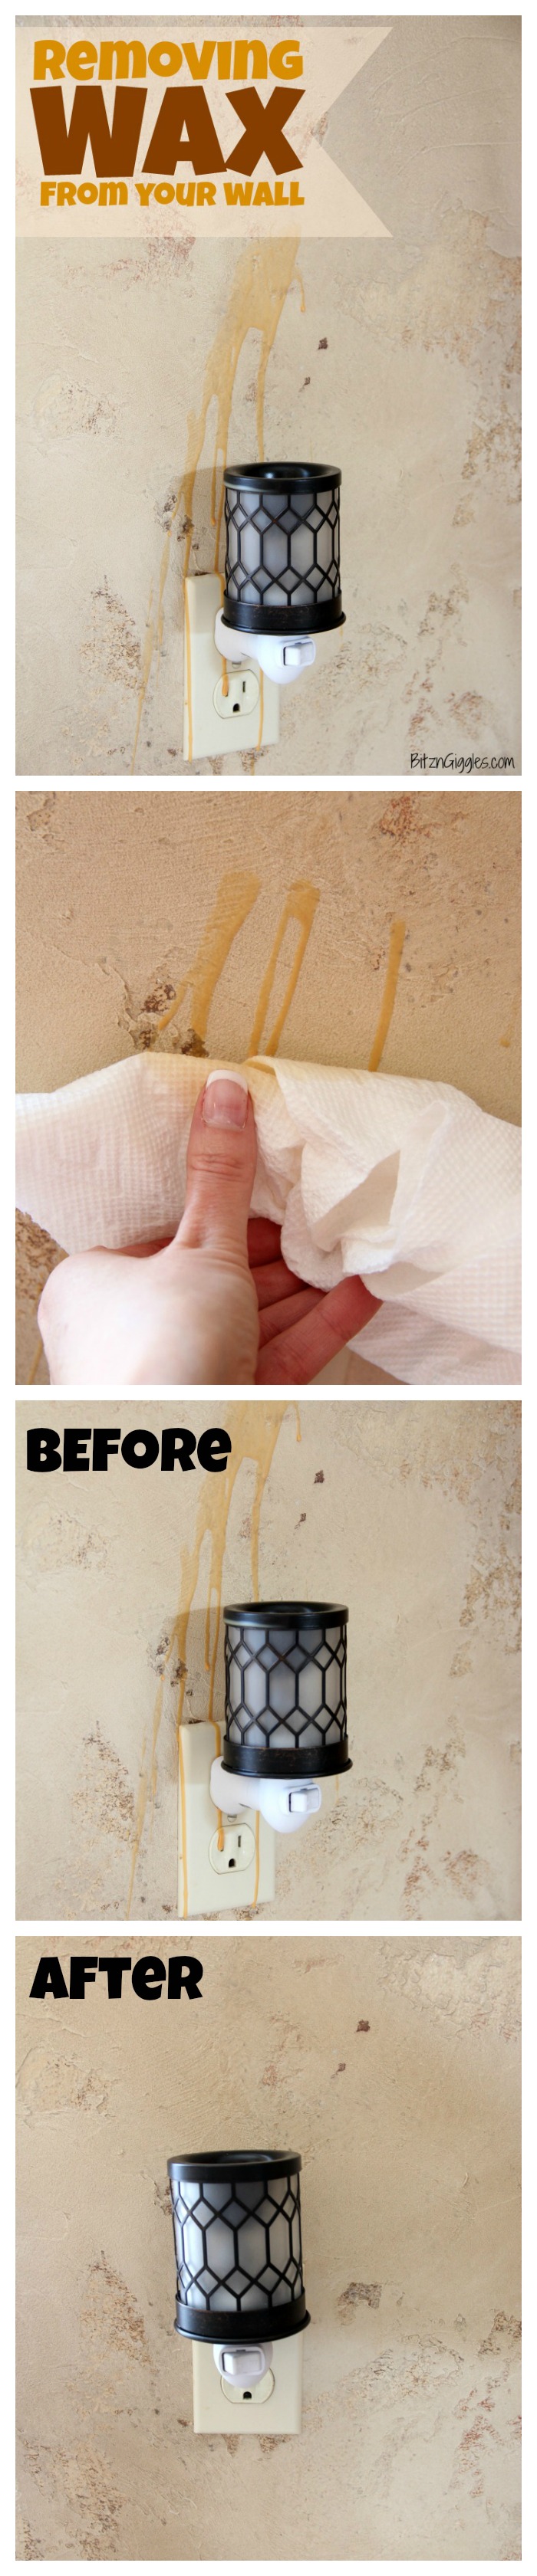 How to Remove Wax From Your Wall - Bitz & Giggles